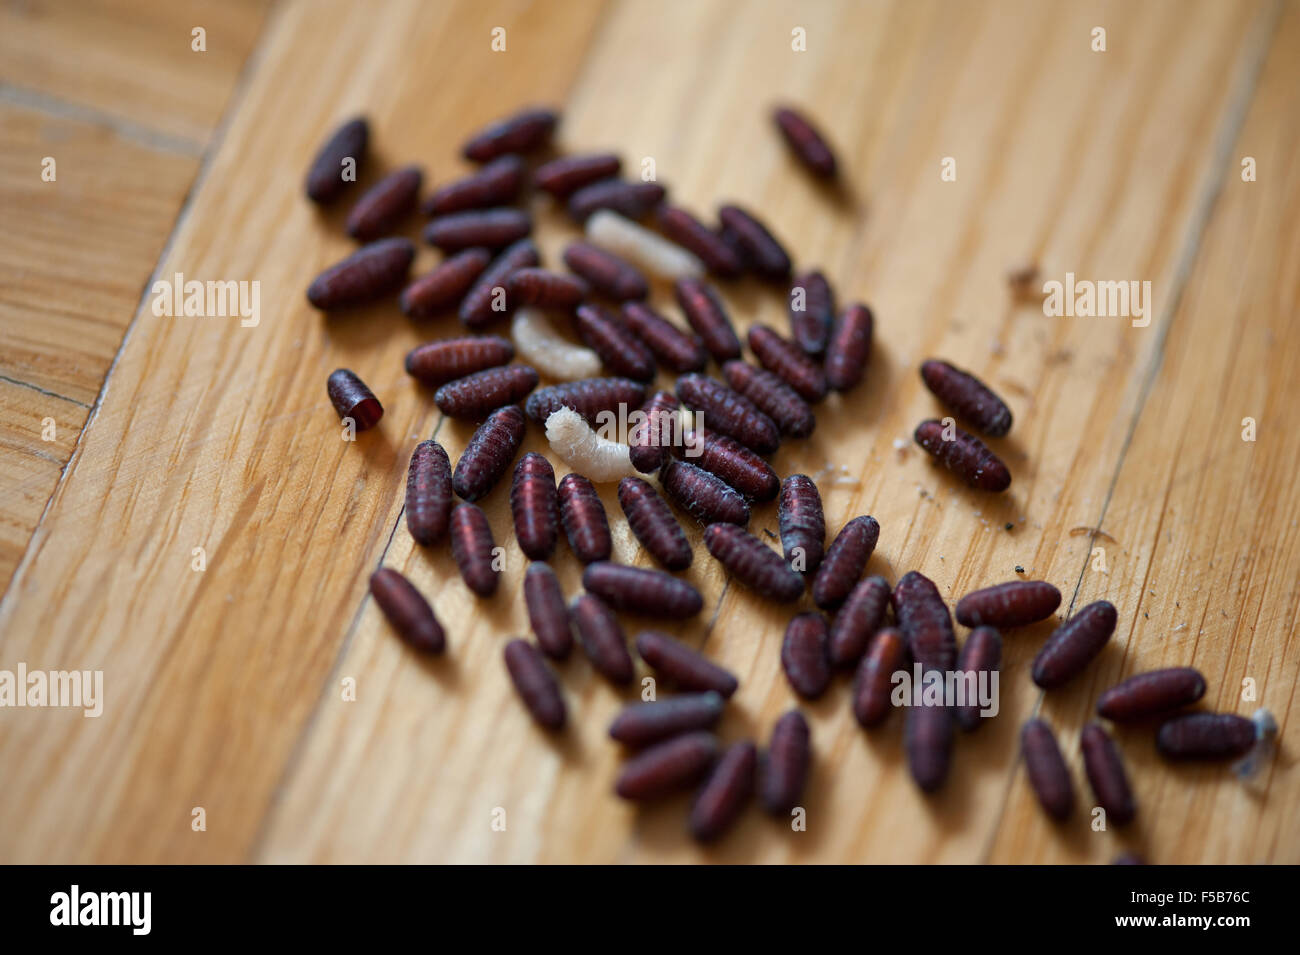 Blowfly larvae and pupae group lying on the floor closeup, bluebottle insect maggots macro, white larvae and red brown pupae fly Stock Photo